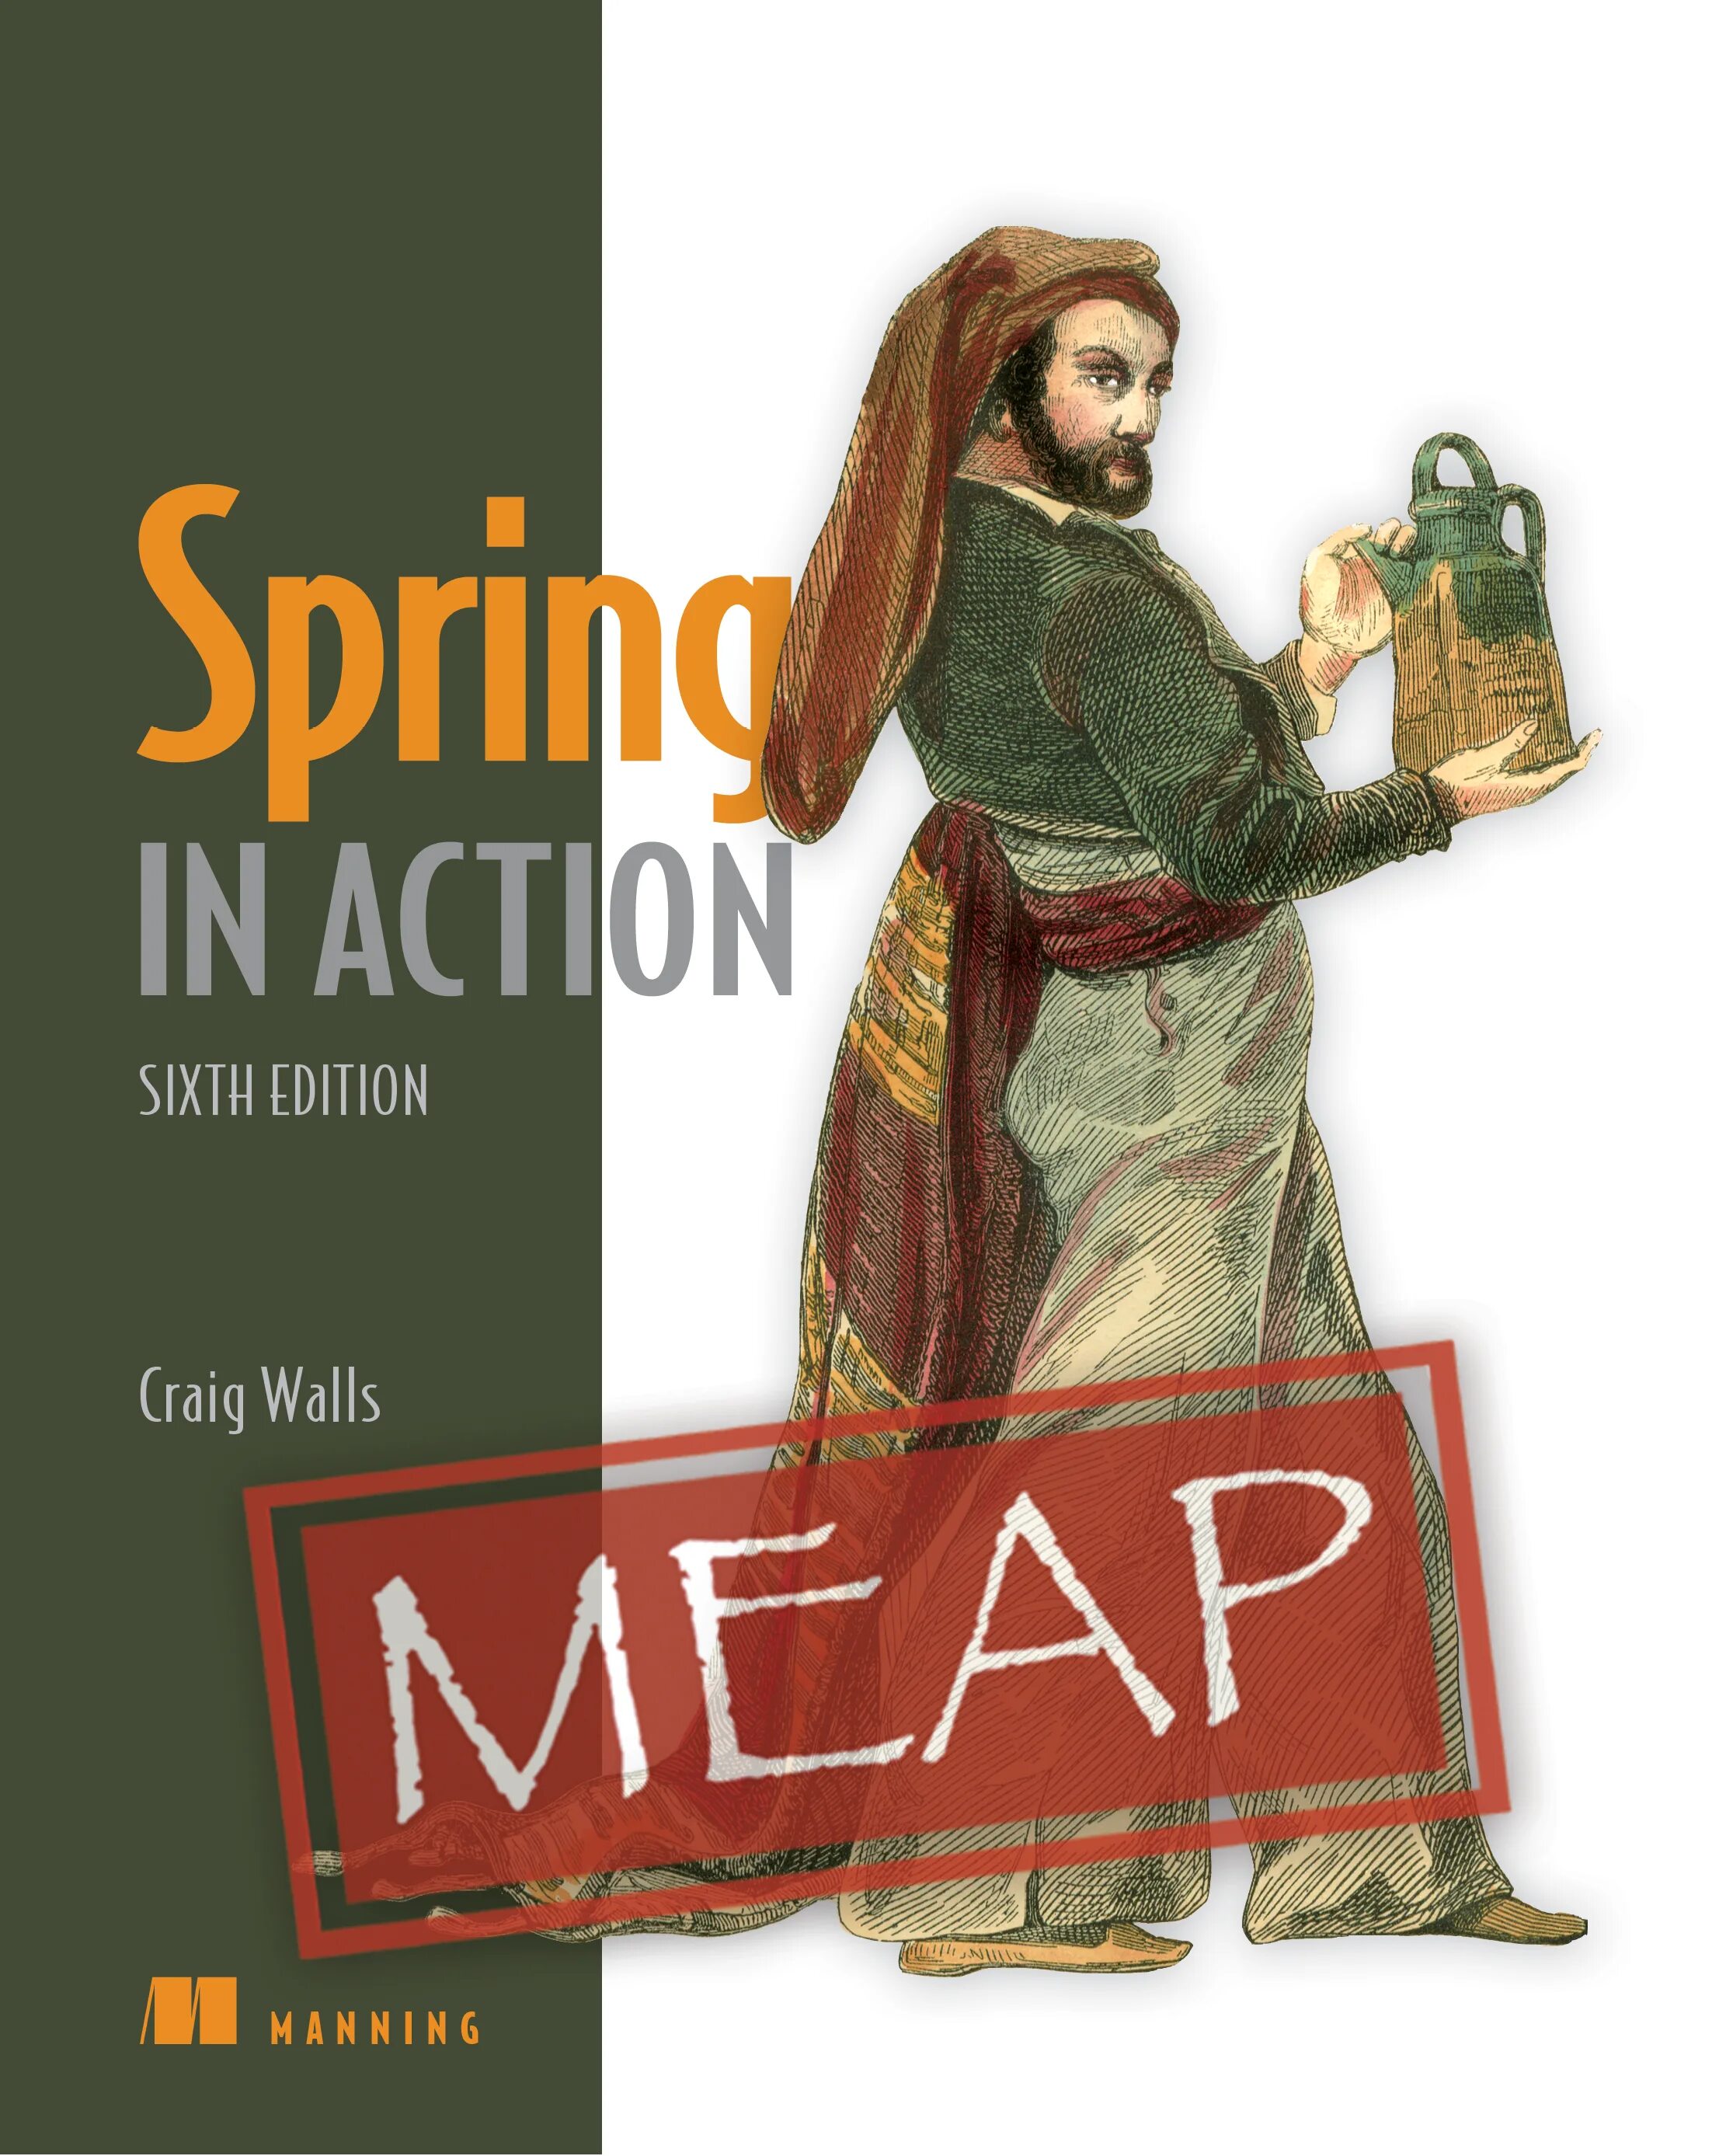 Spring in Action 6 издание. Spring in Action sixth Edition. Manning Издательство. Книга Spring java.